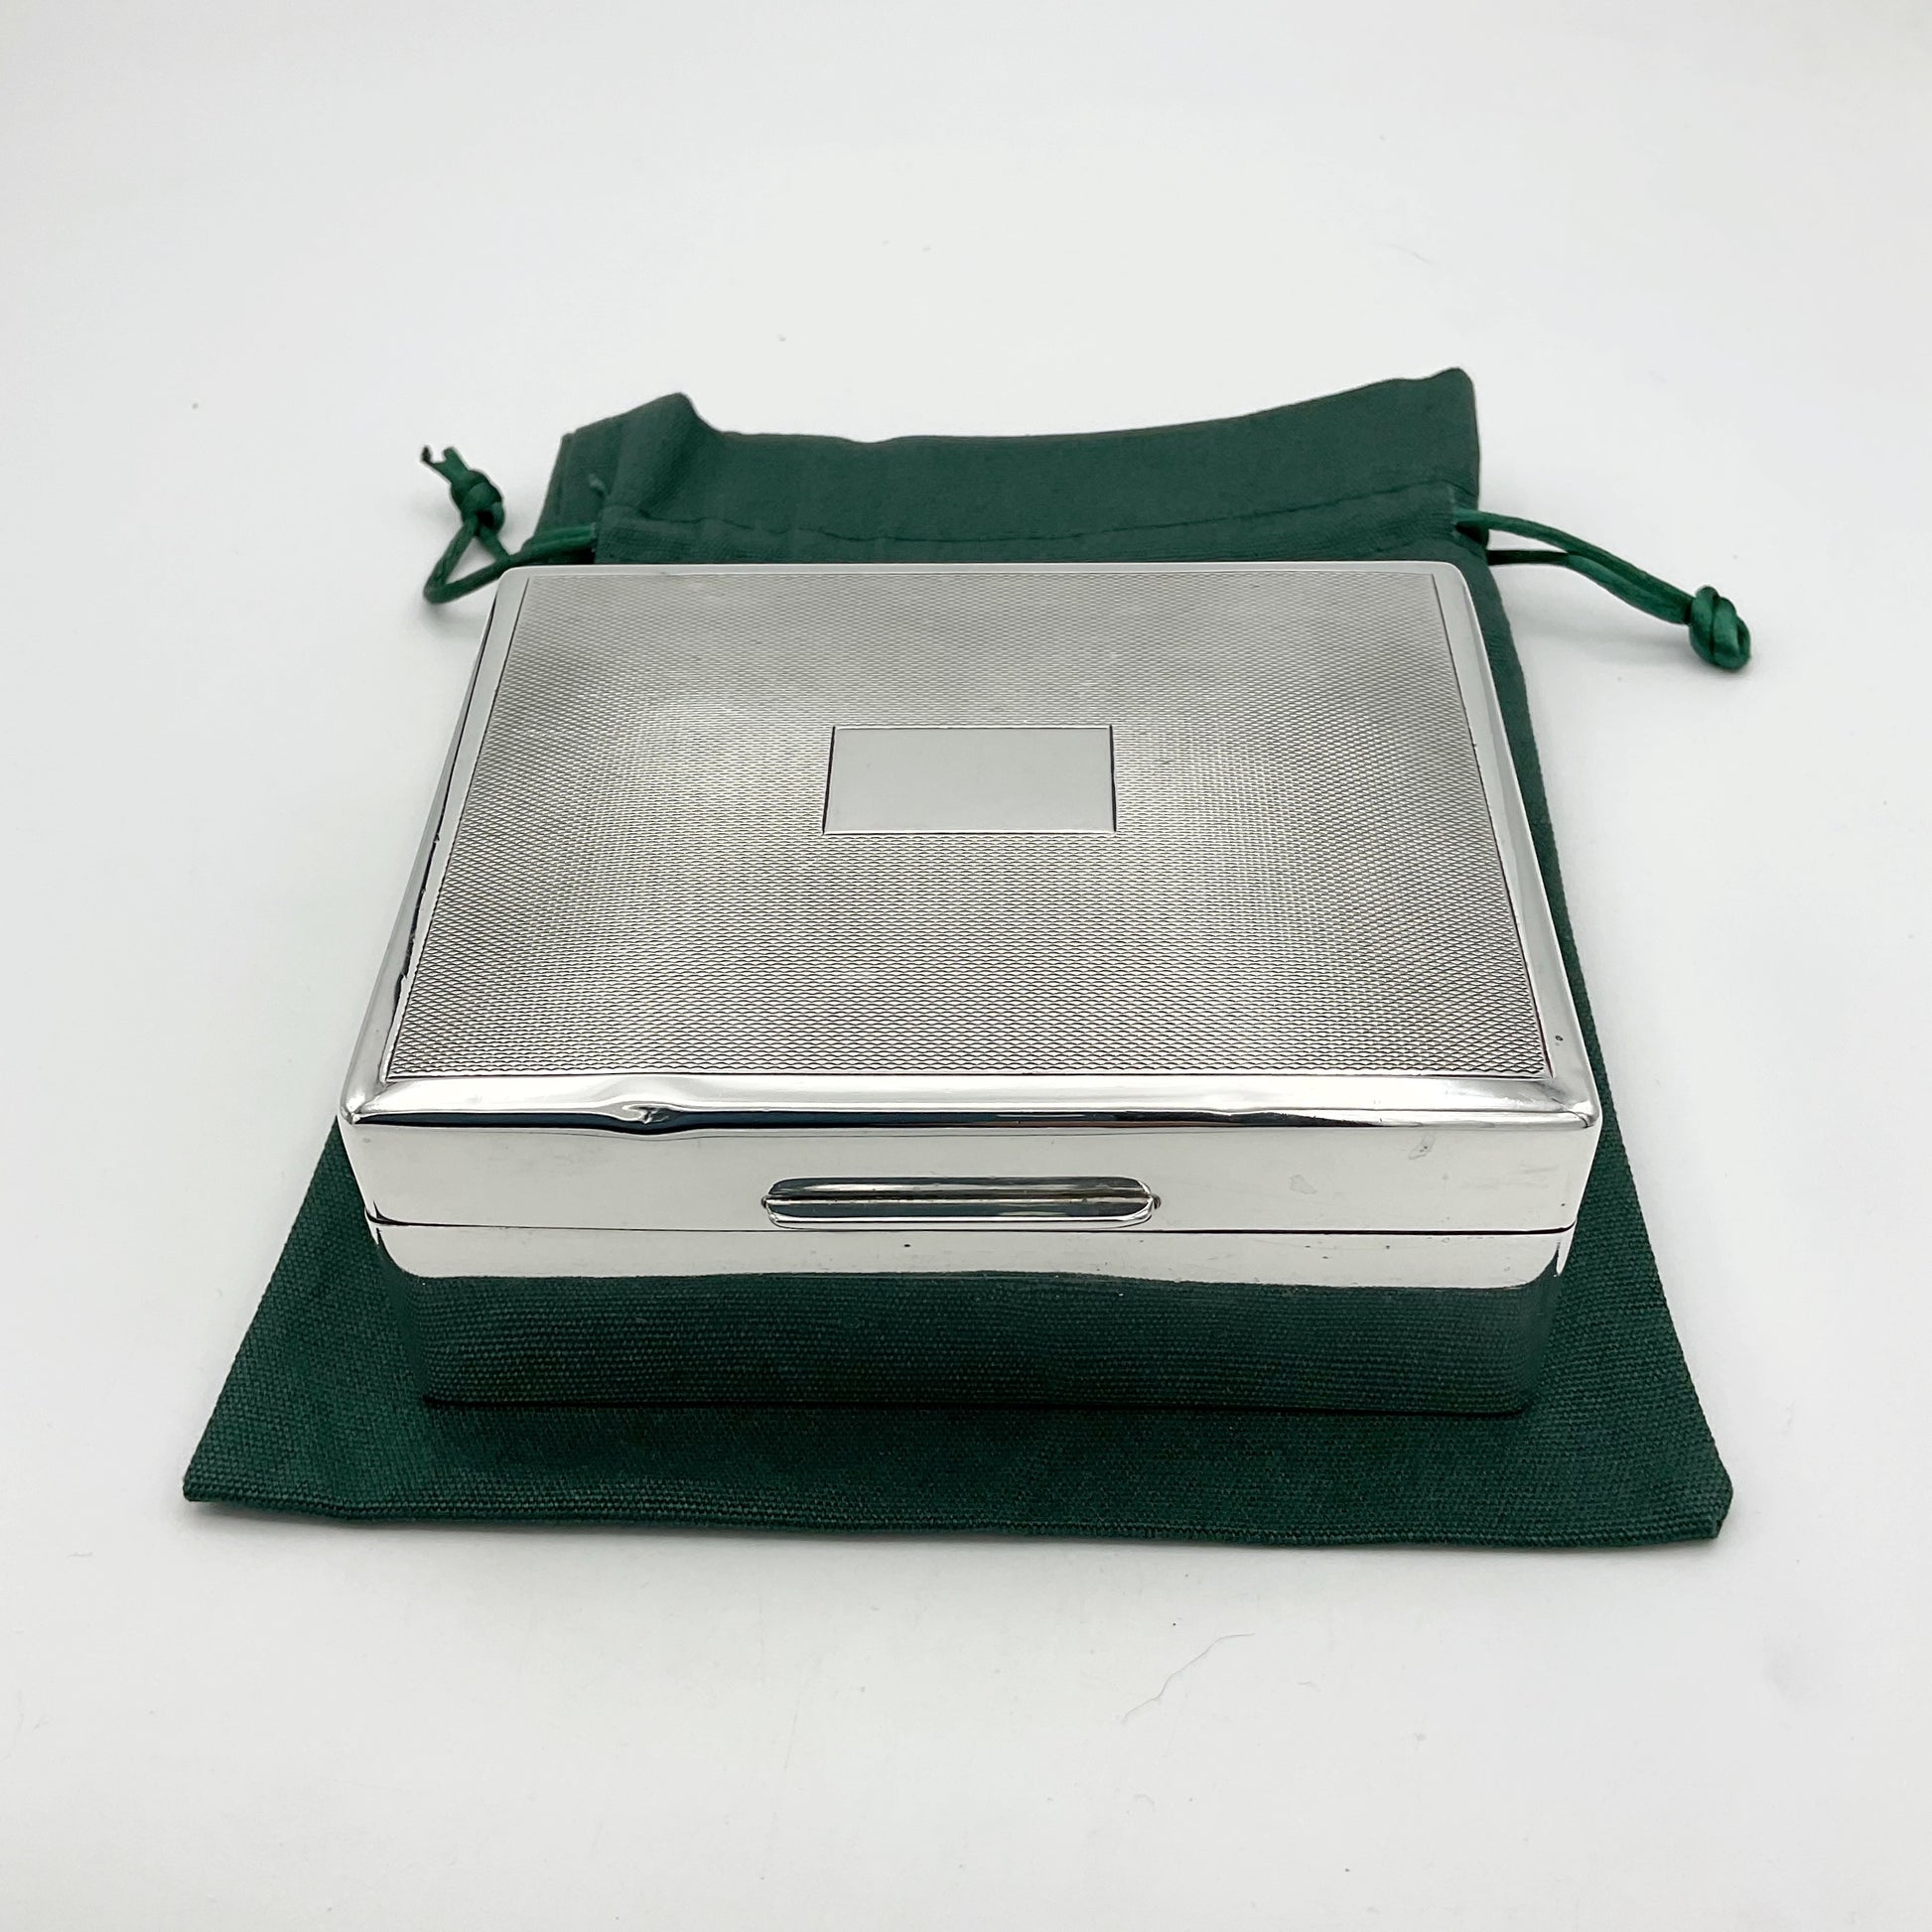 Solid silver cigarette box from the 1940s sitting on a green cotton gift bag